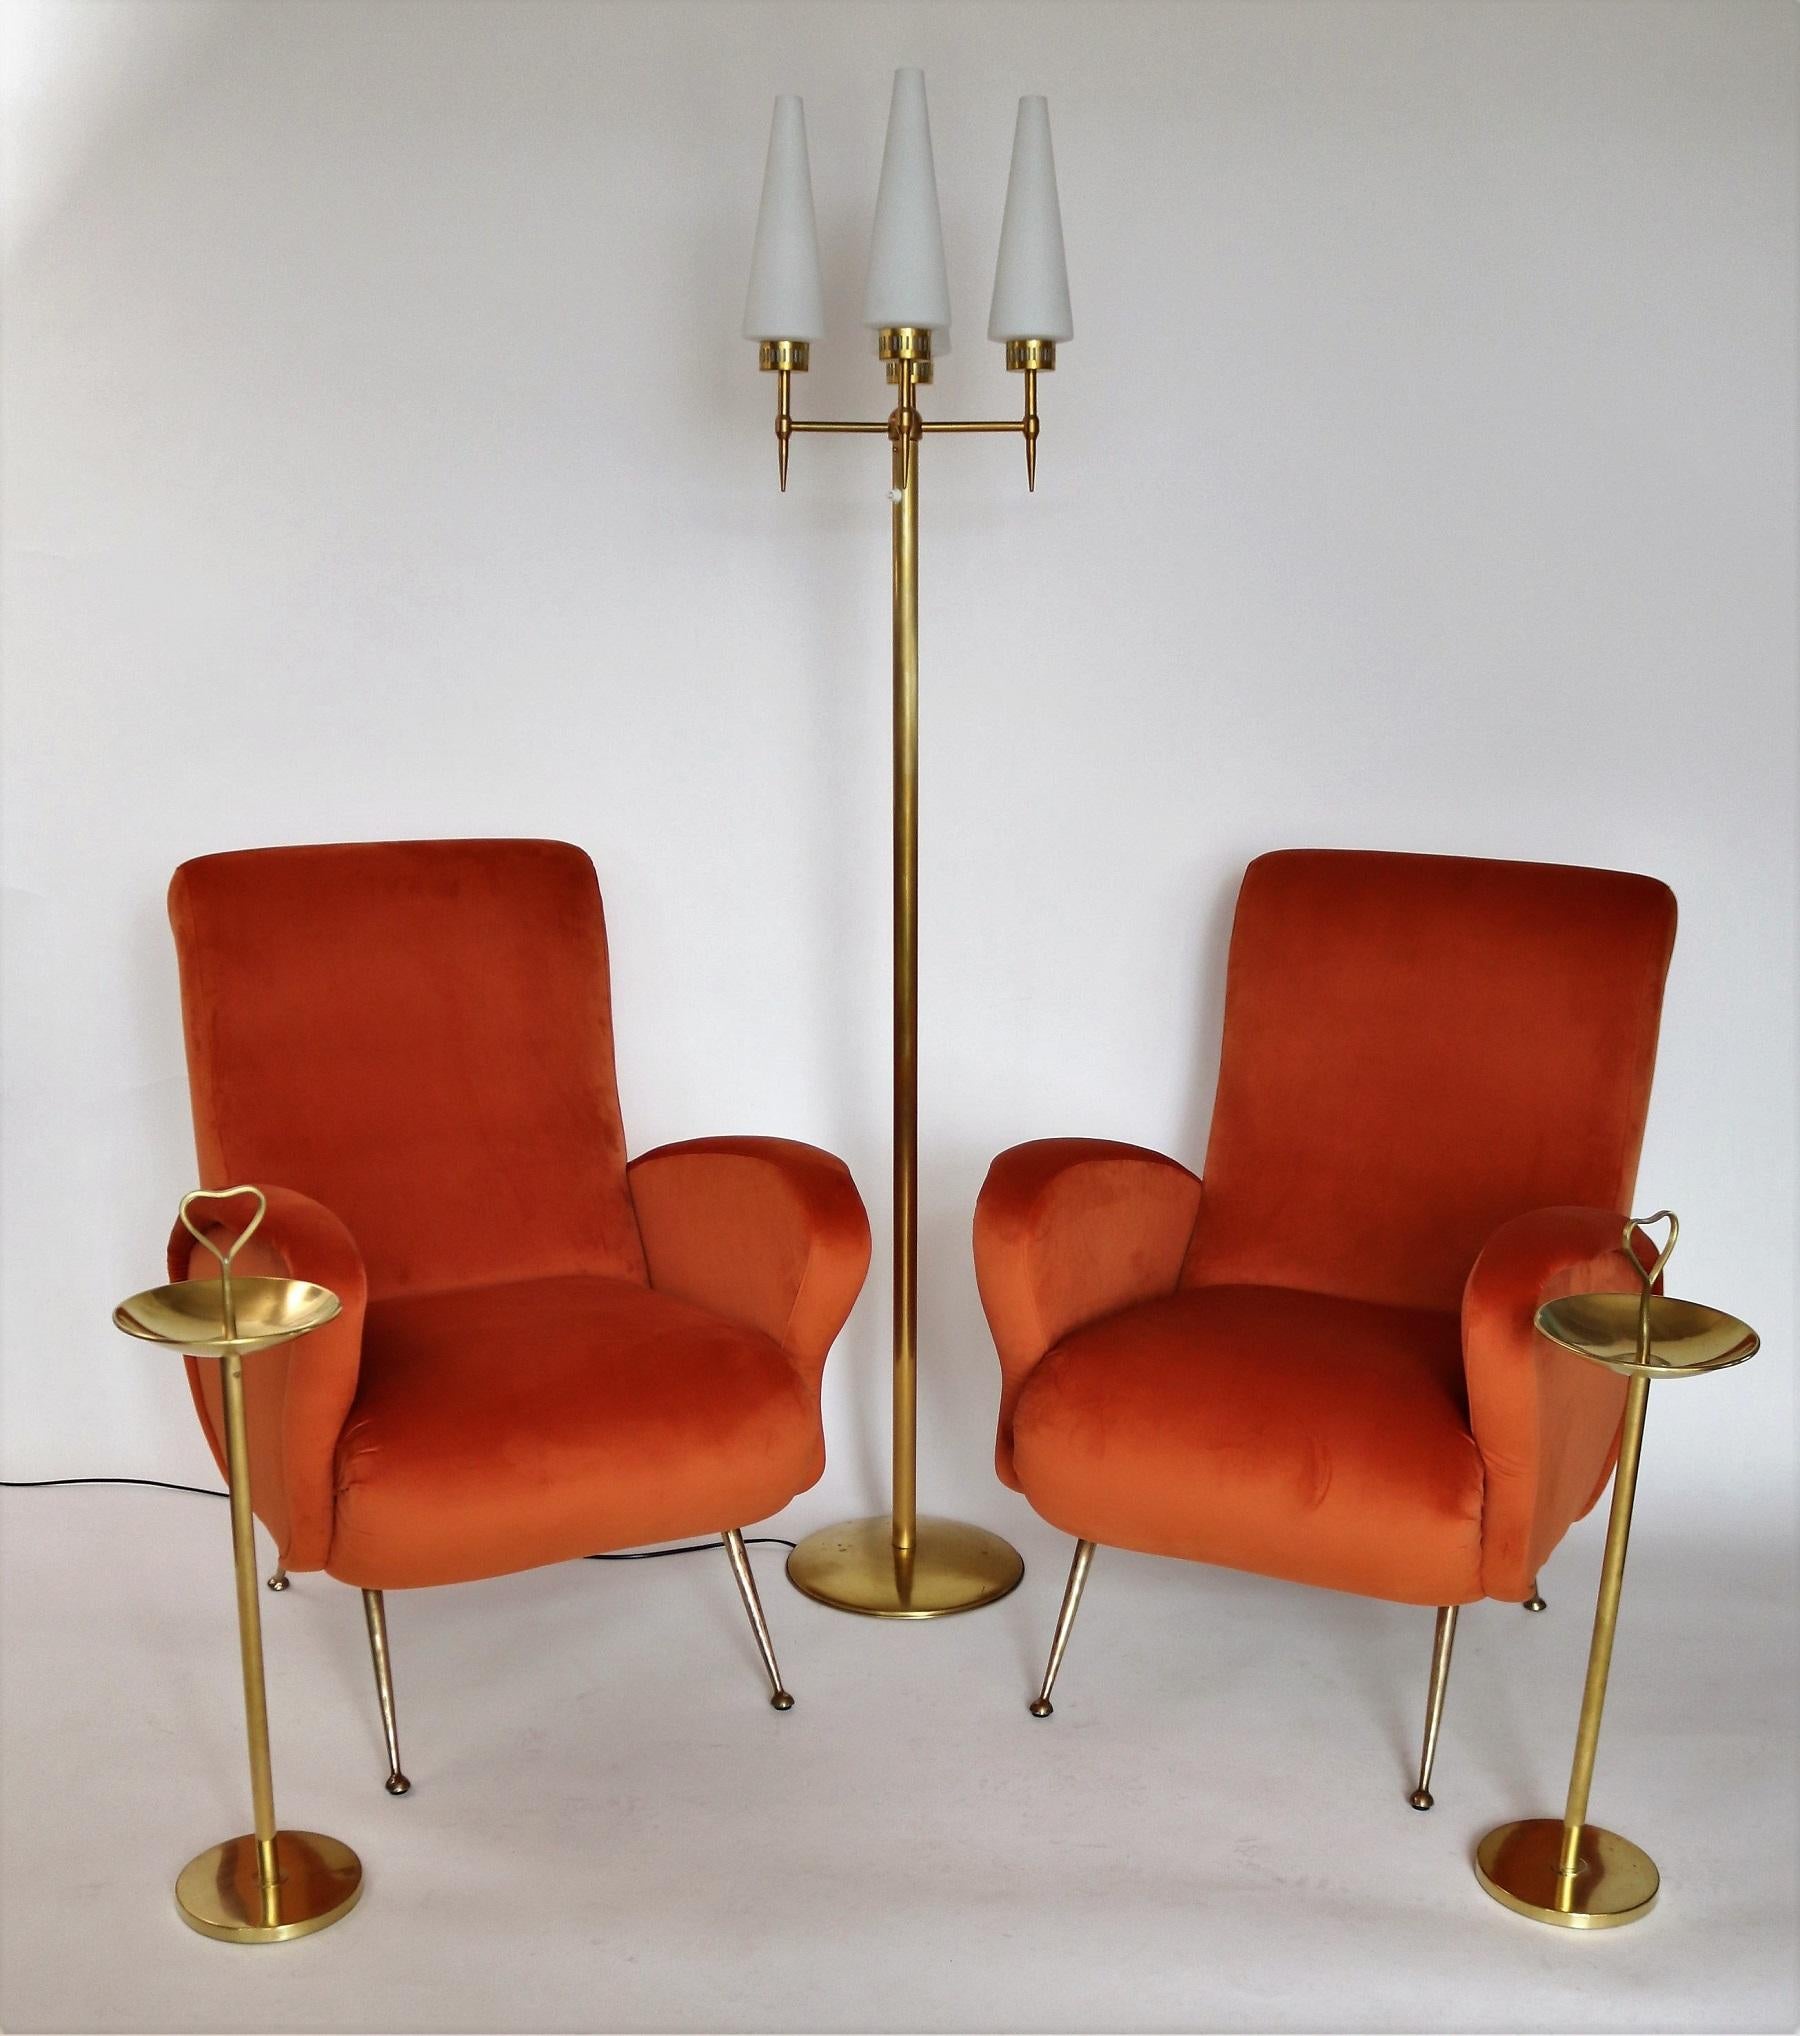 Gorgeous soft pair of two Italian original midcentury armchairs or lounge chairs from the 1950s with full Stiletto brass tips.
Completely restored internally with quality material and outside reupholstered with soft russet colored ( rusty-red -